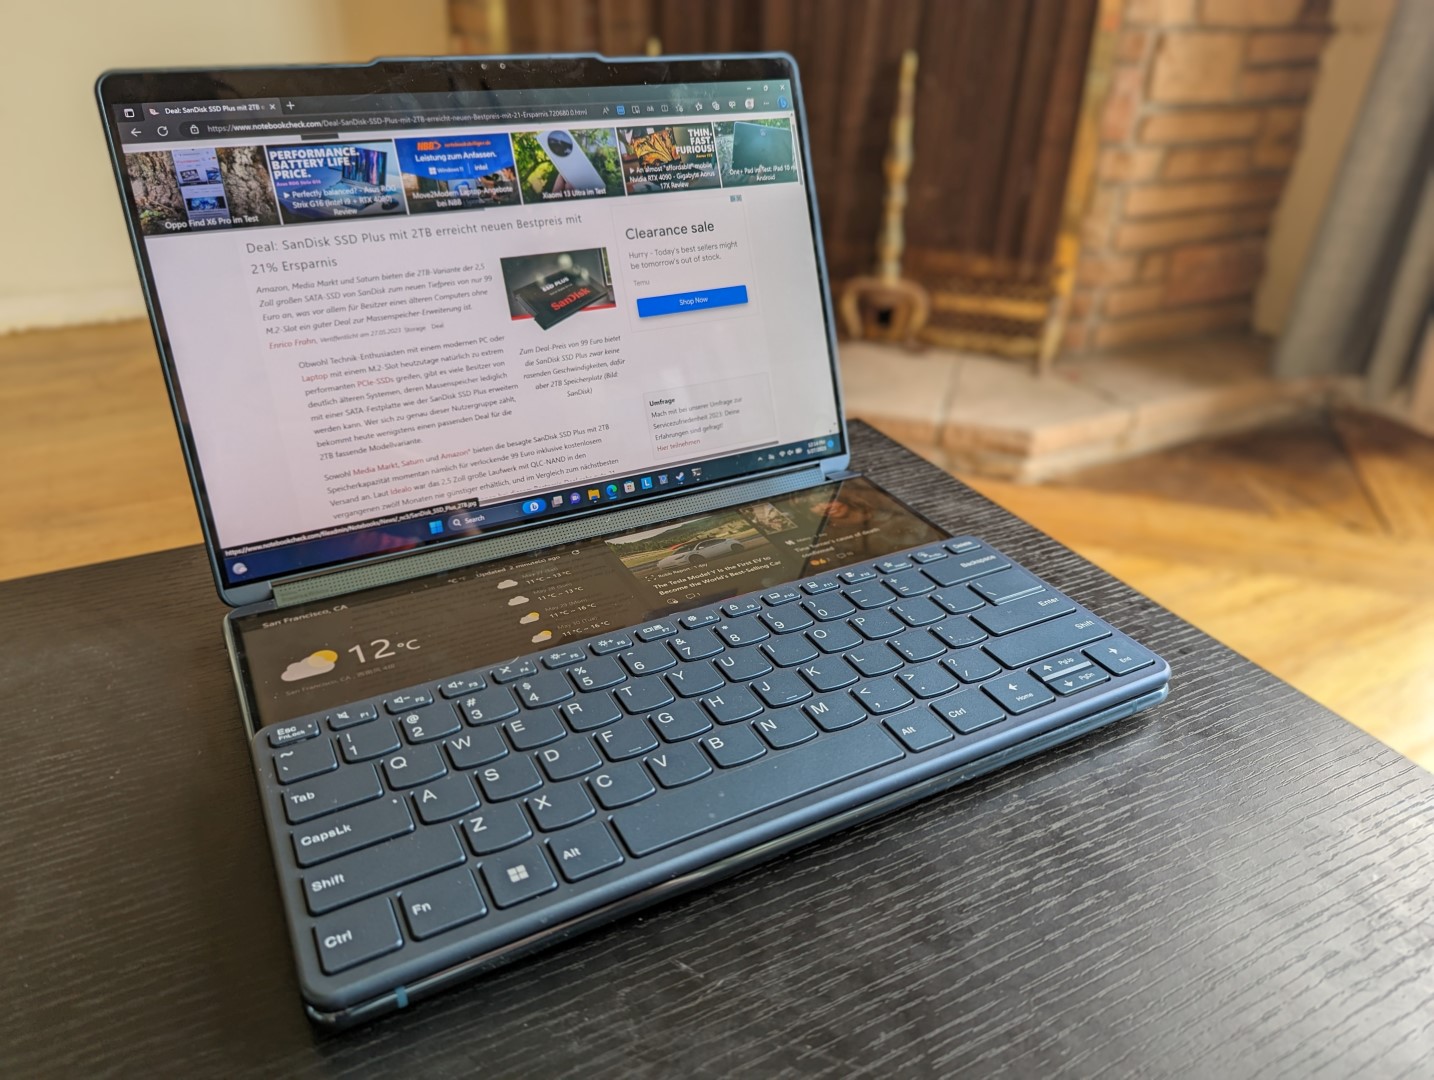 Lenovo Yoga Book 2018 review: The keyless keyboard returns, now in E Ink